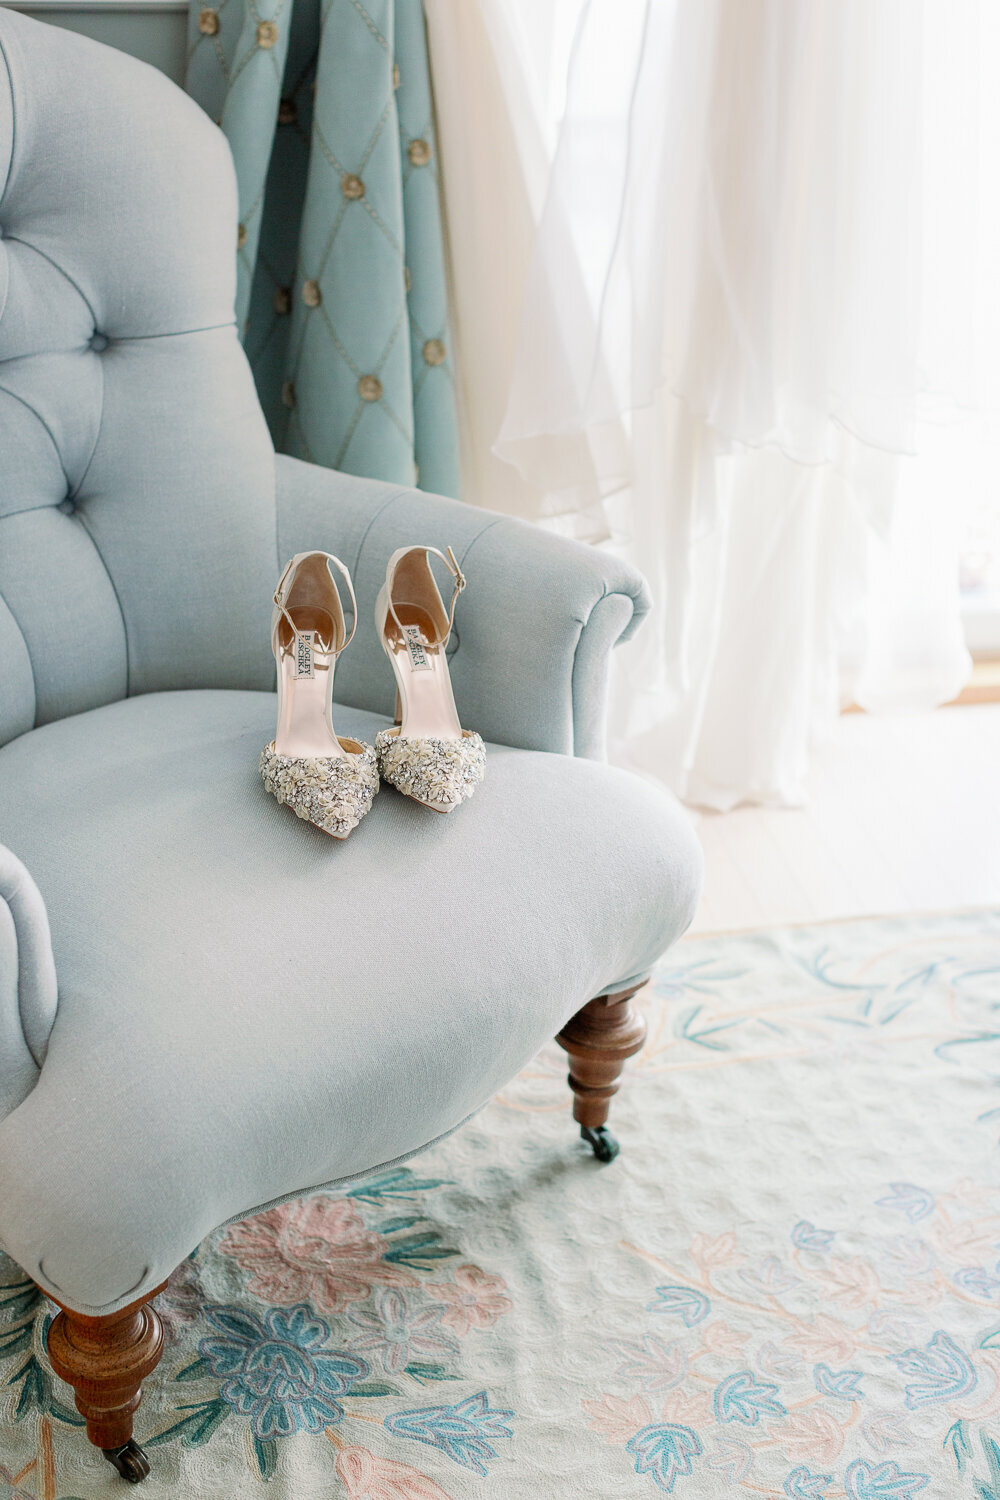 A pair of heels sitting on a plush blue chair.